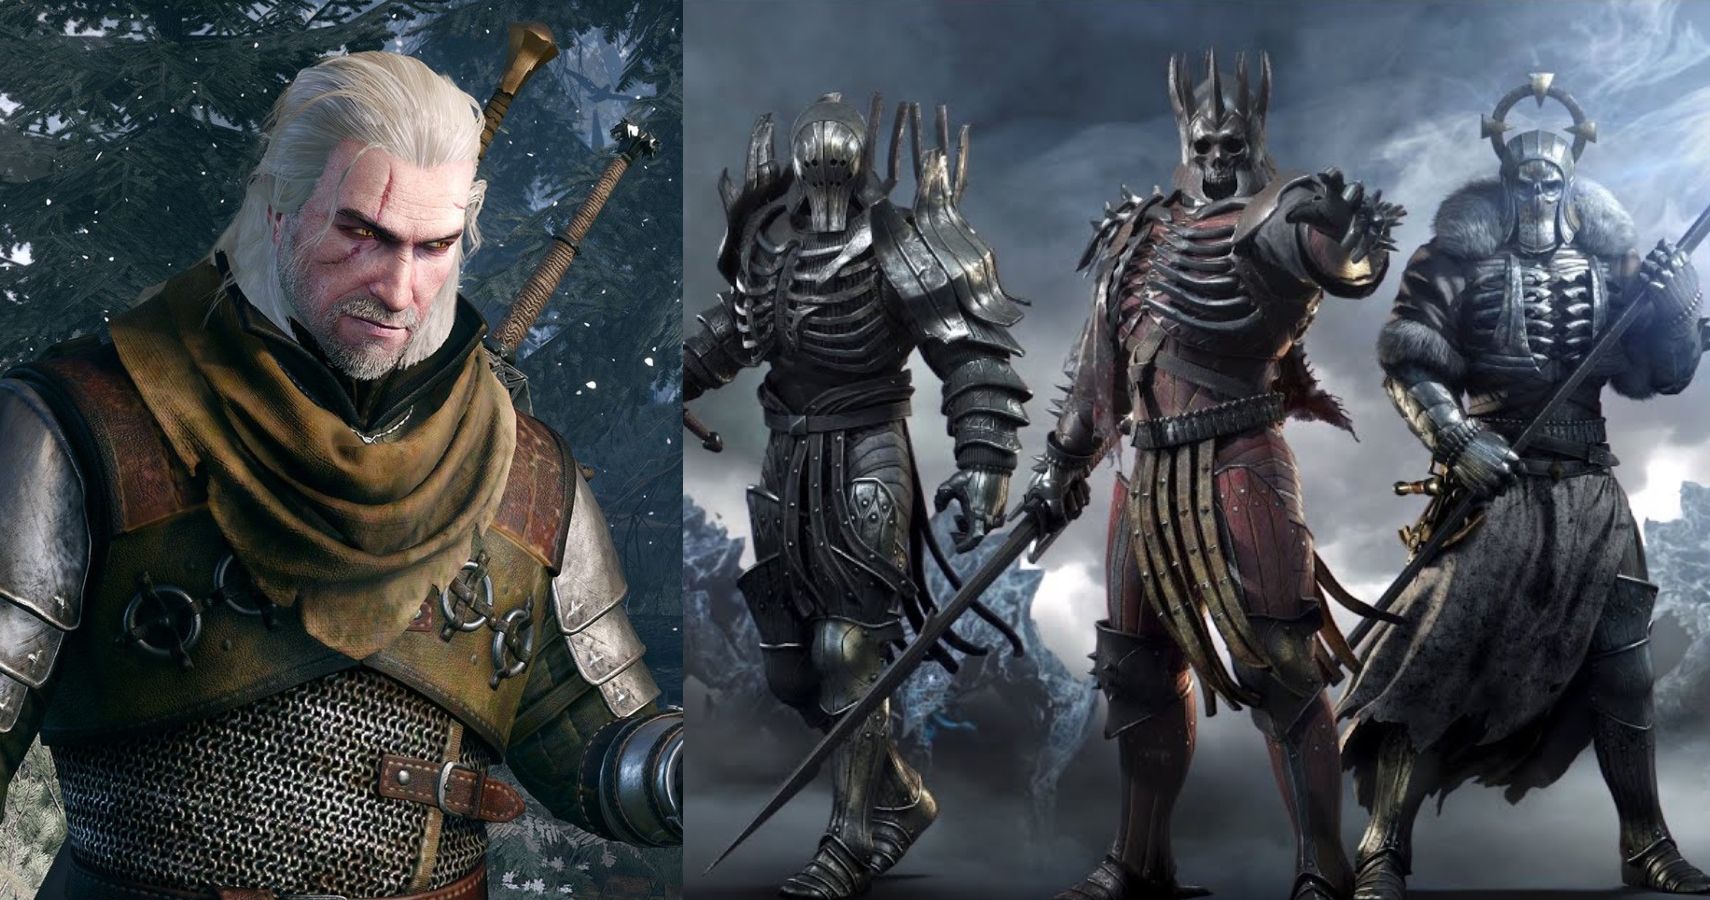 The Witcher 3 Geralt of Rivia and the Wild Hunt